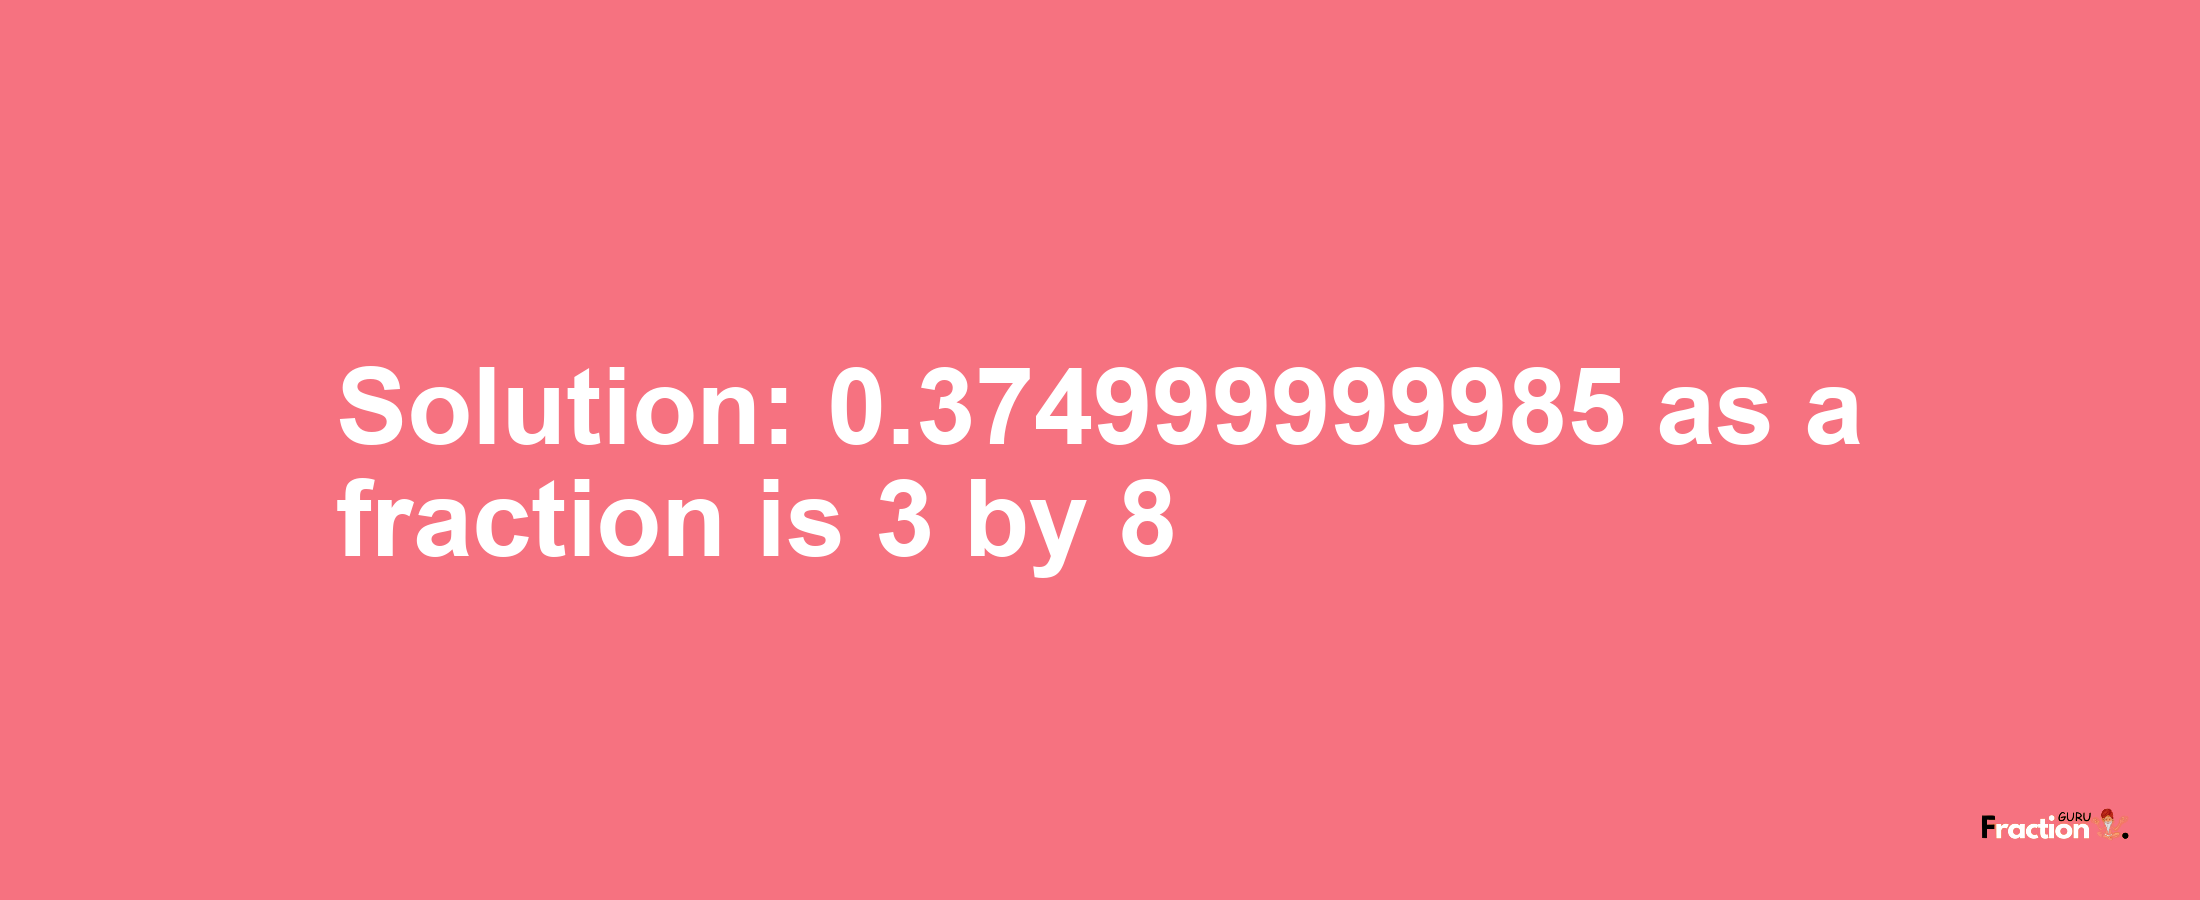 Solution:0.374999999985 as a fraction is 3/8